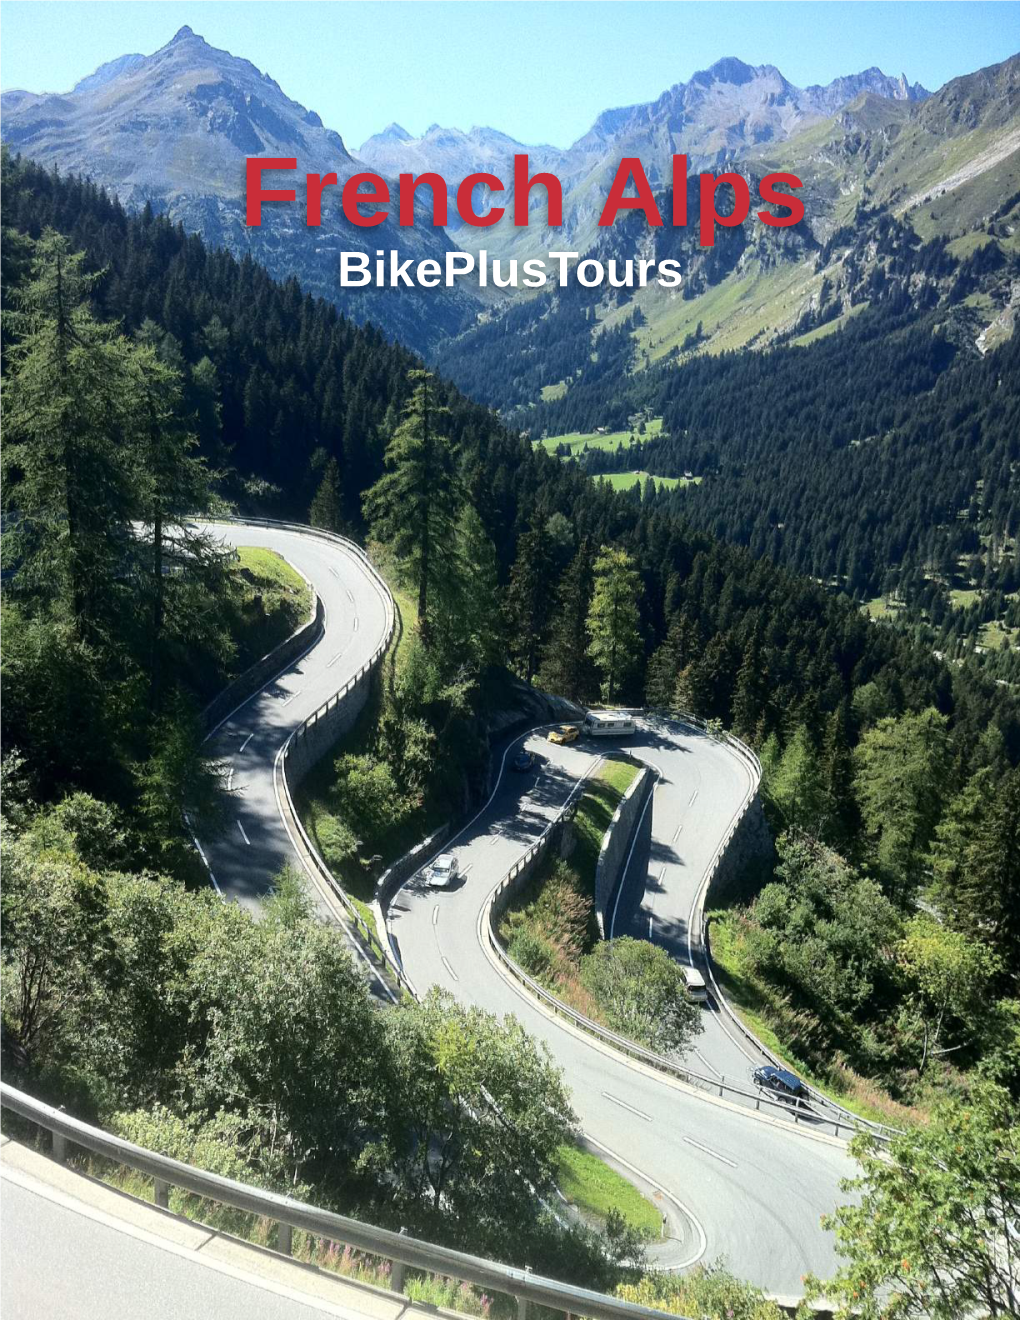 French Alps Bikeplustours Come Join Us in June 2019 for a Spectacular on the Road You'll Be Fully Supported by Owners Week of Cycling in the French Alps